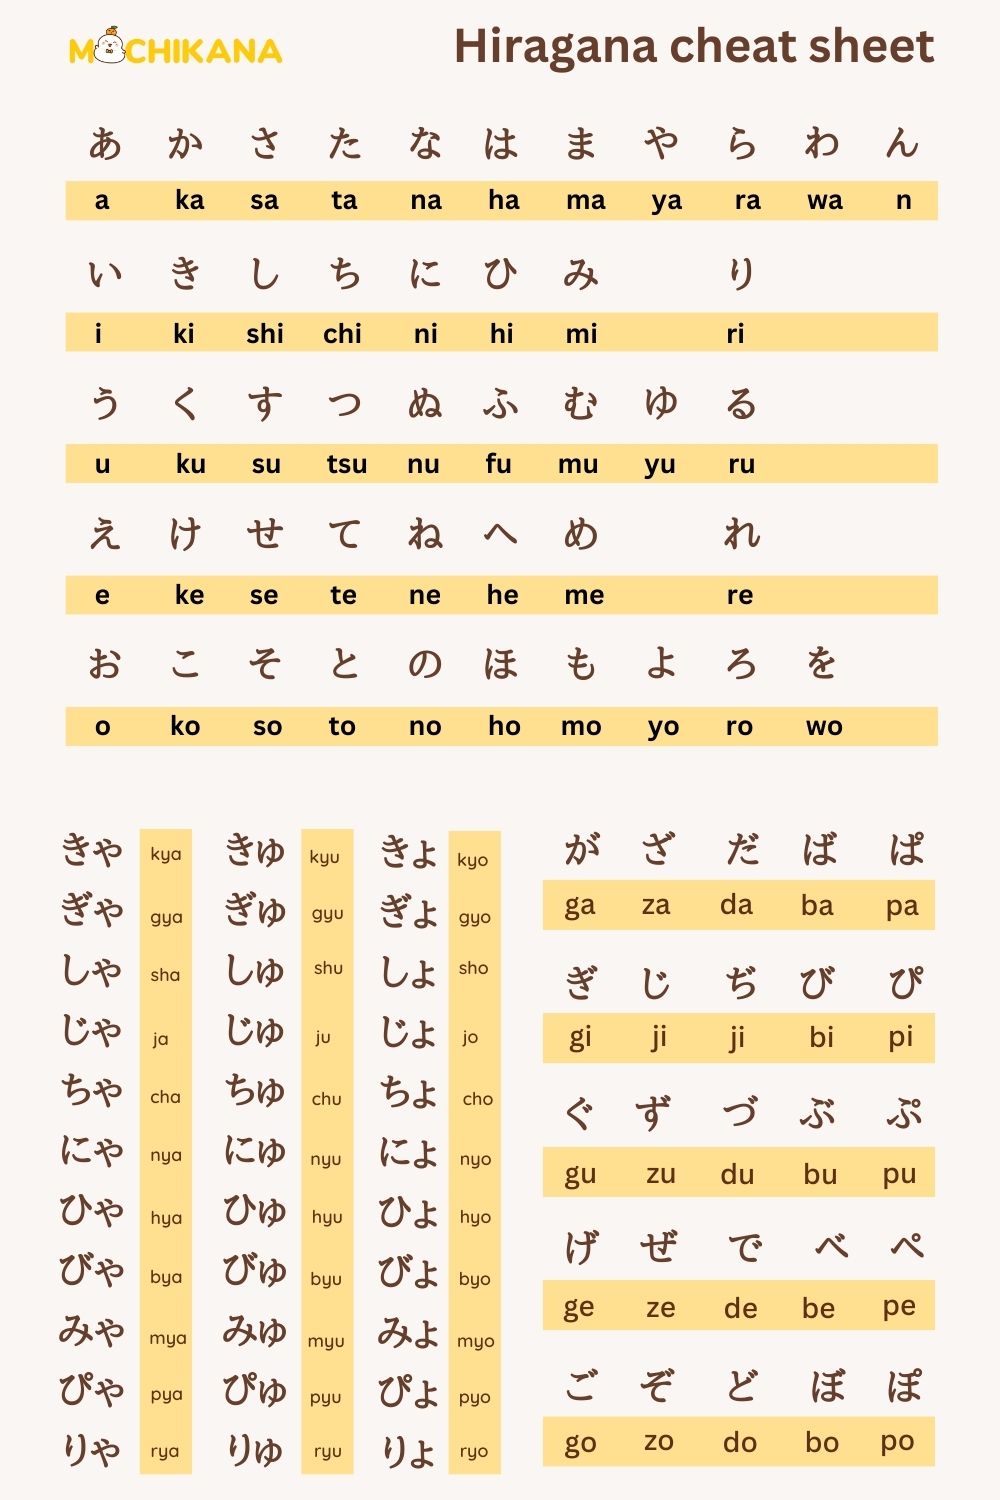 Hiragana chart with full characters free to download